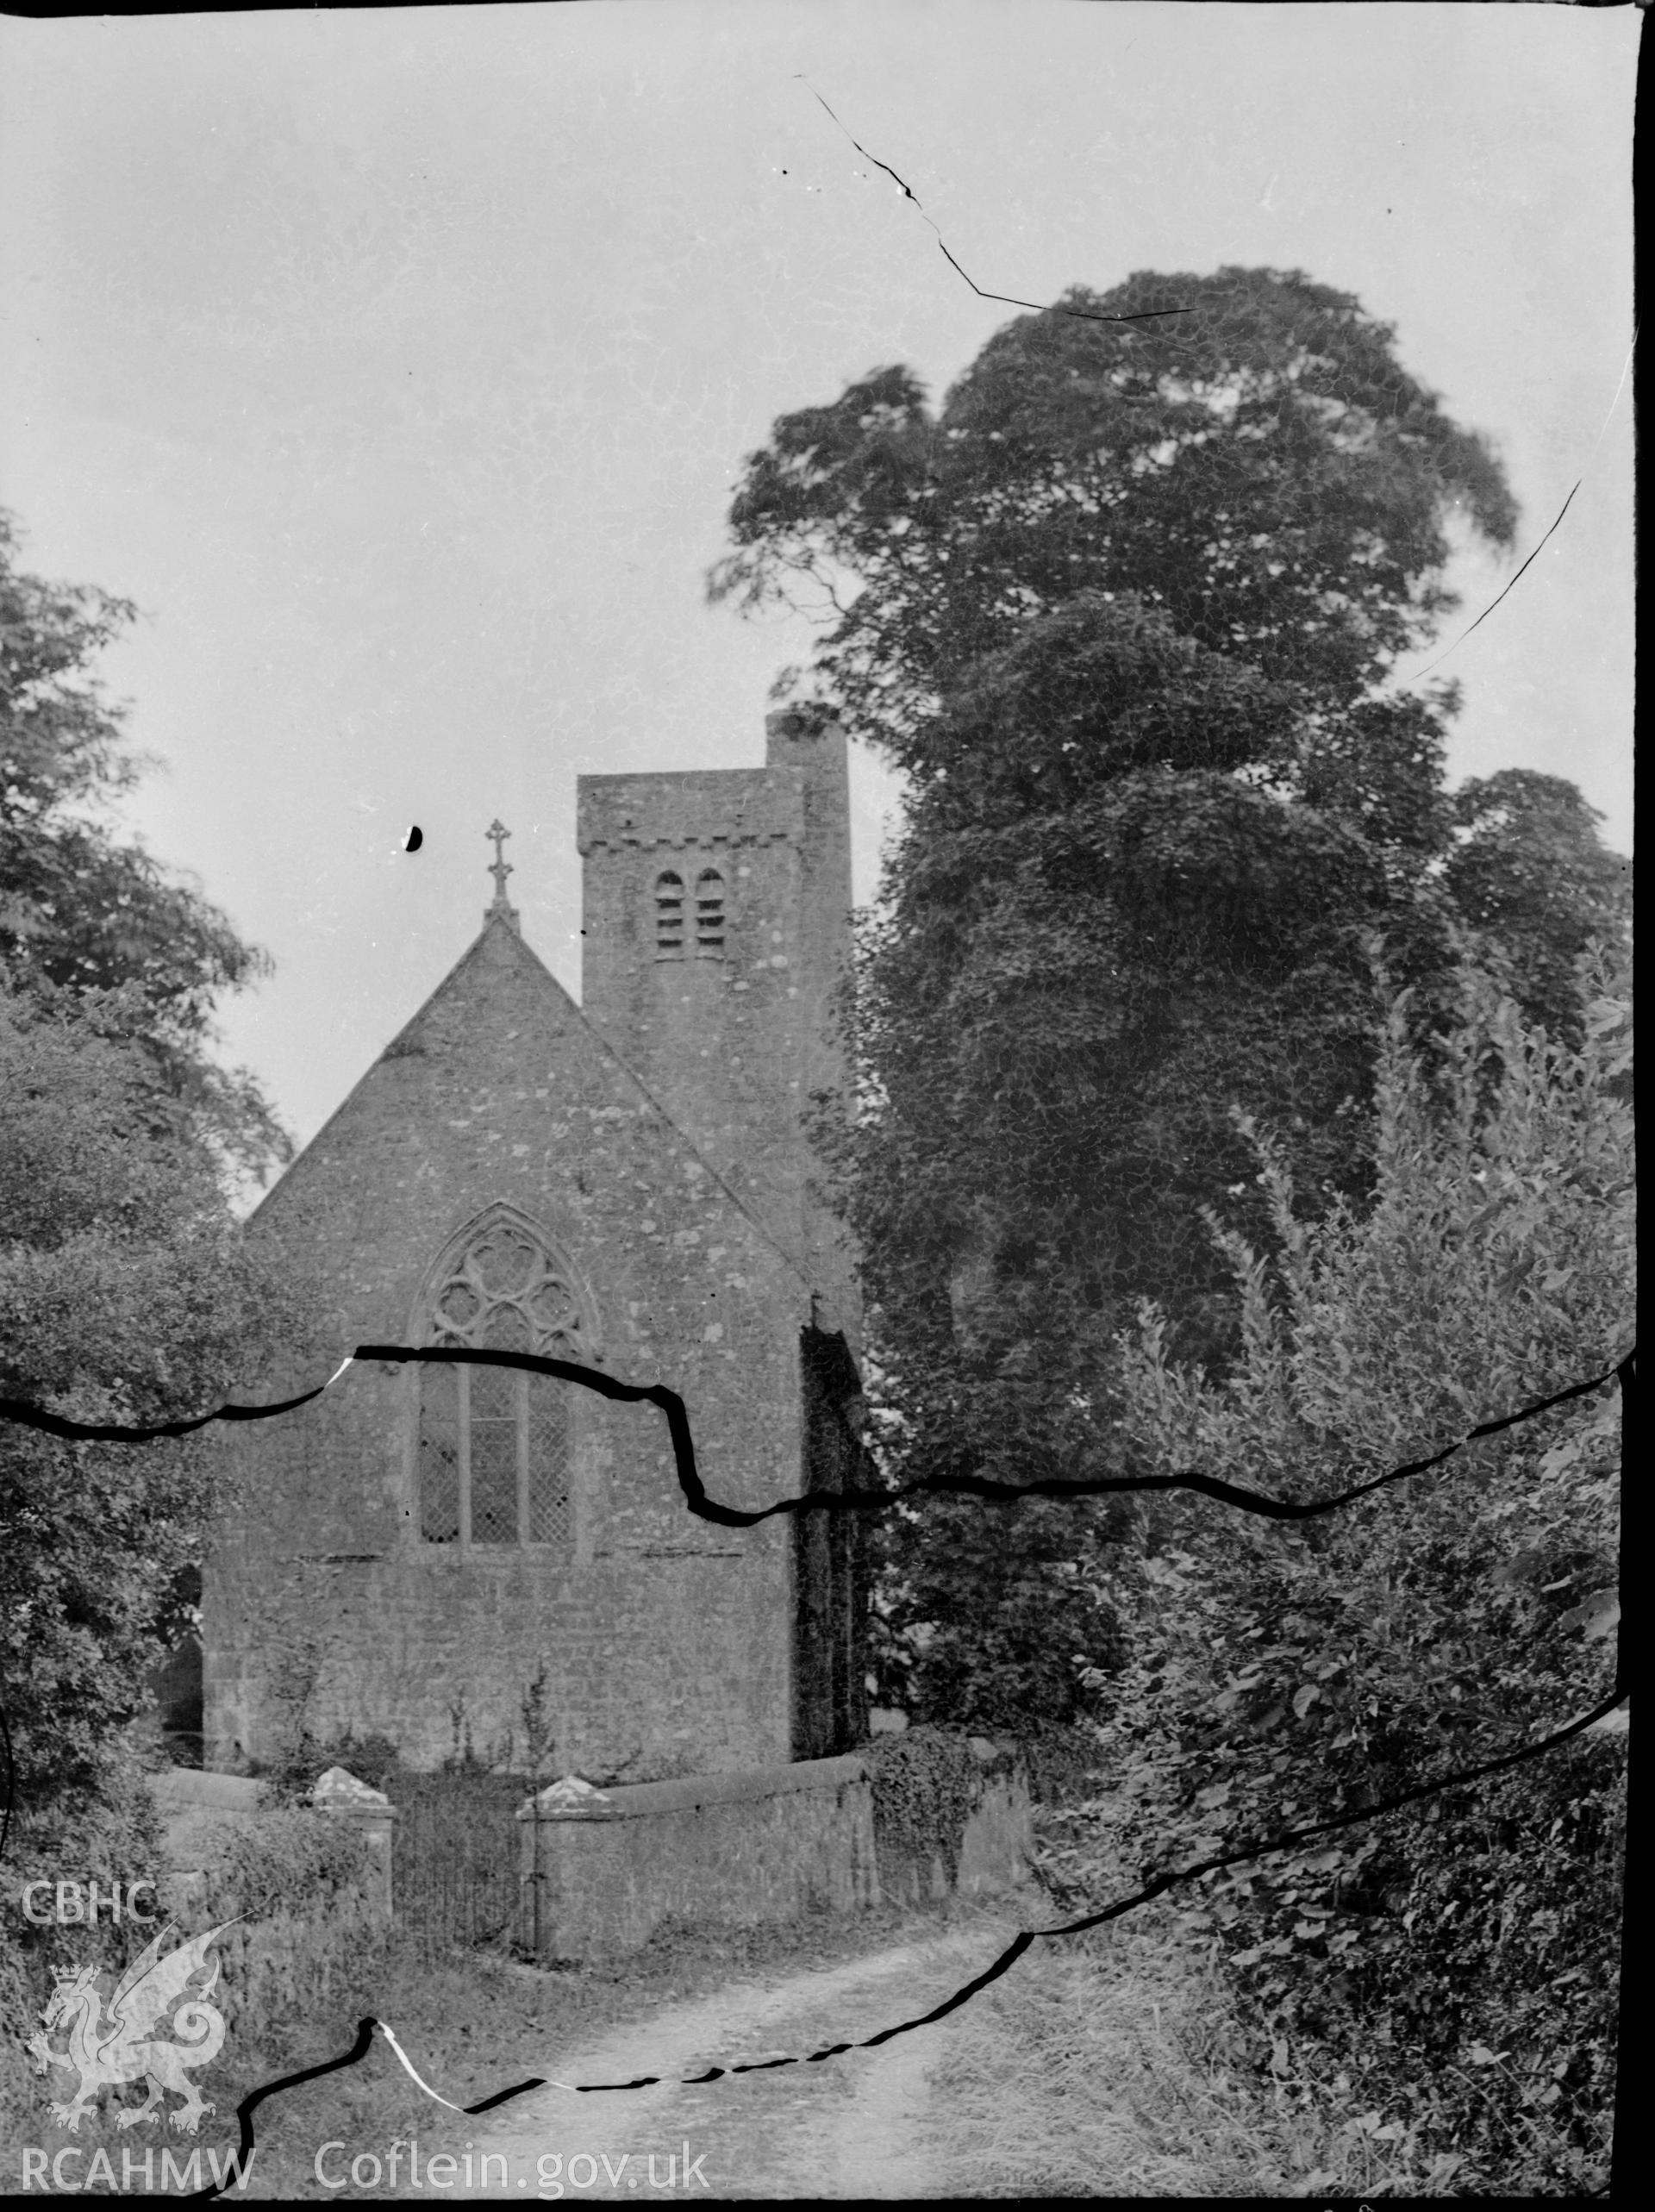 Black and white photo showing St Mary's Church, Haverfordwest.